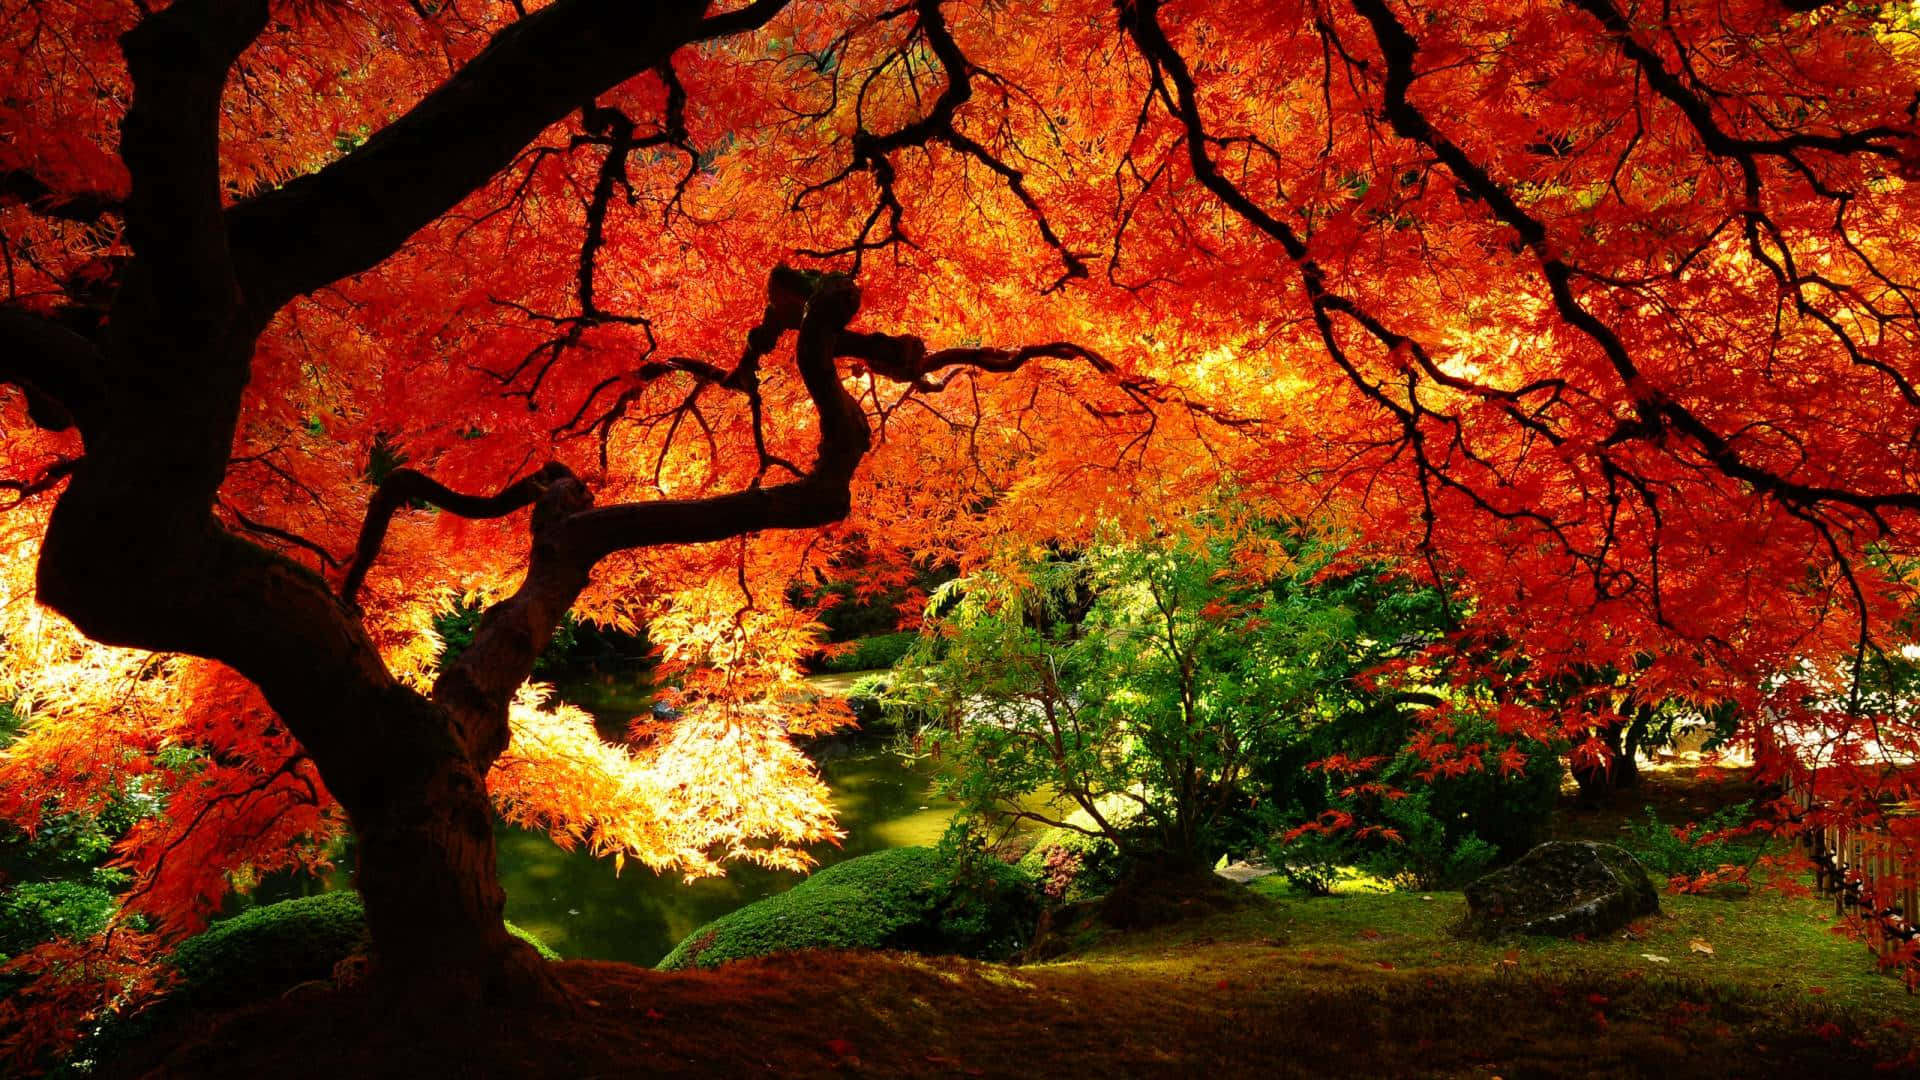 A picturesque Autumn landscape on the First Day of Fall Wallpaper